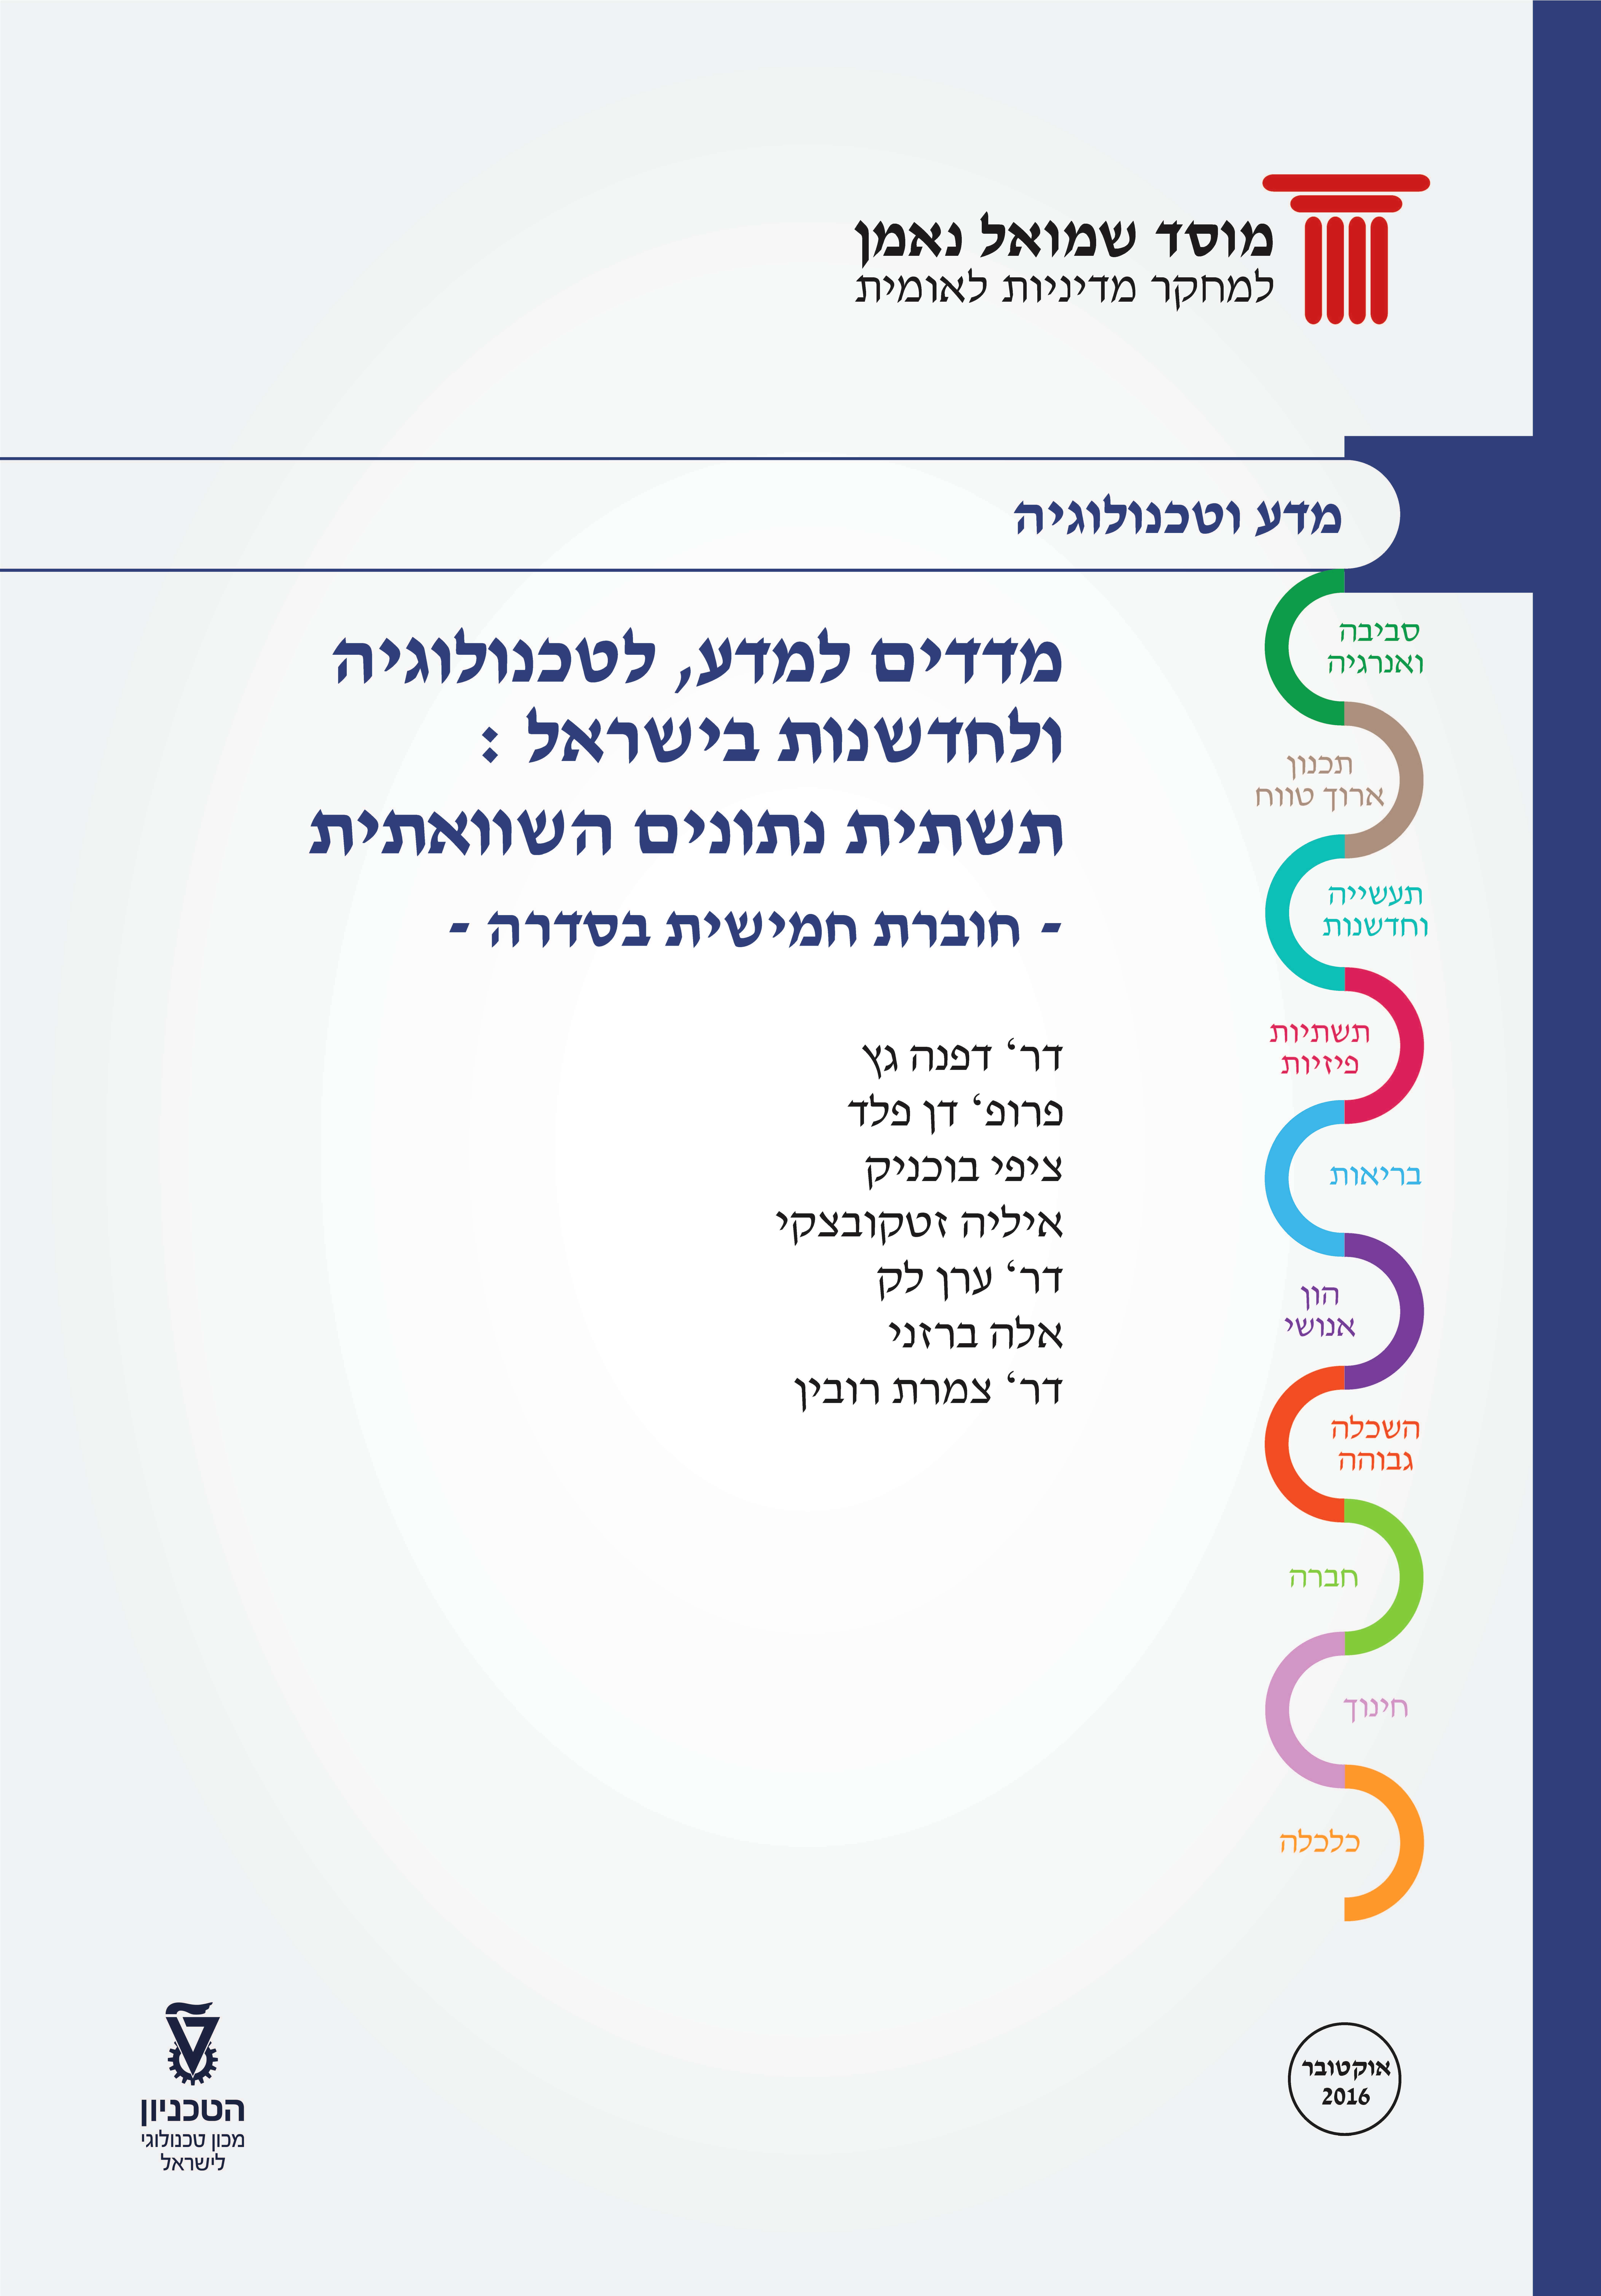 Science , Technology and Innovation  Indicators in Israel: An International Comparison (Fifth edition)